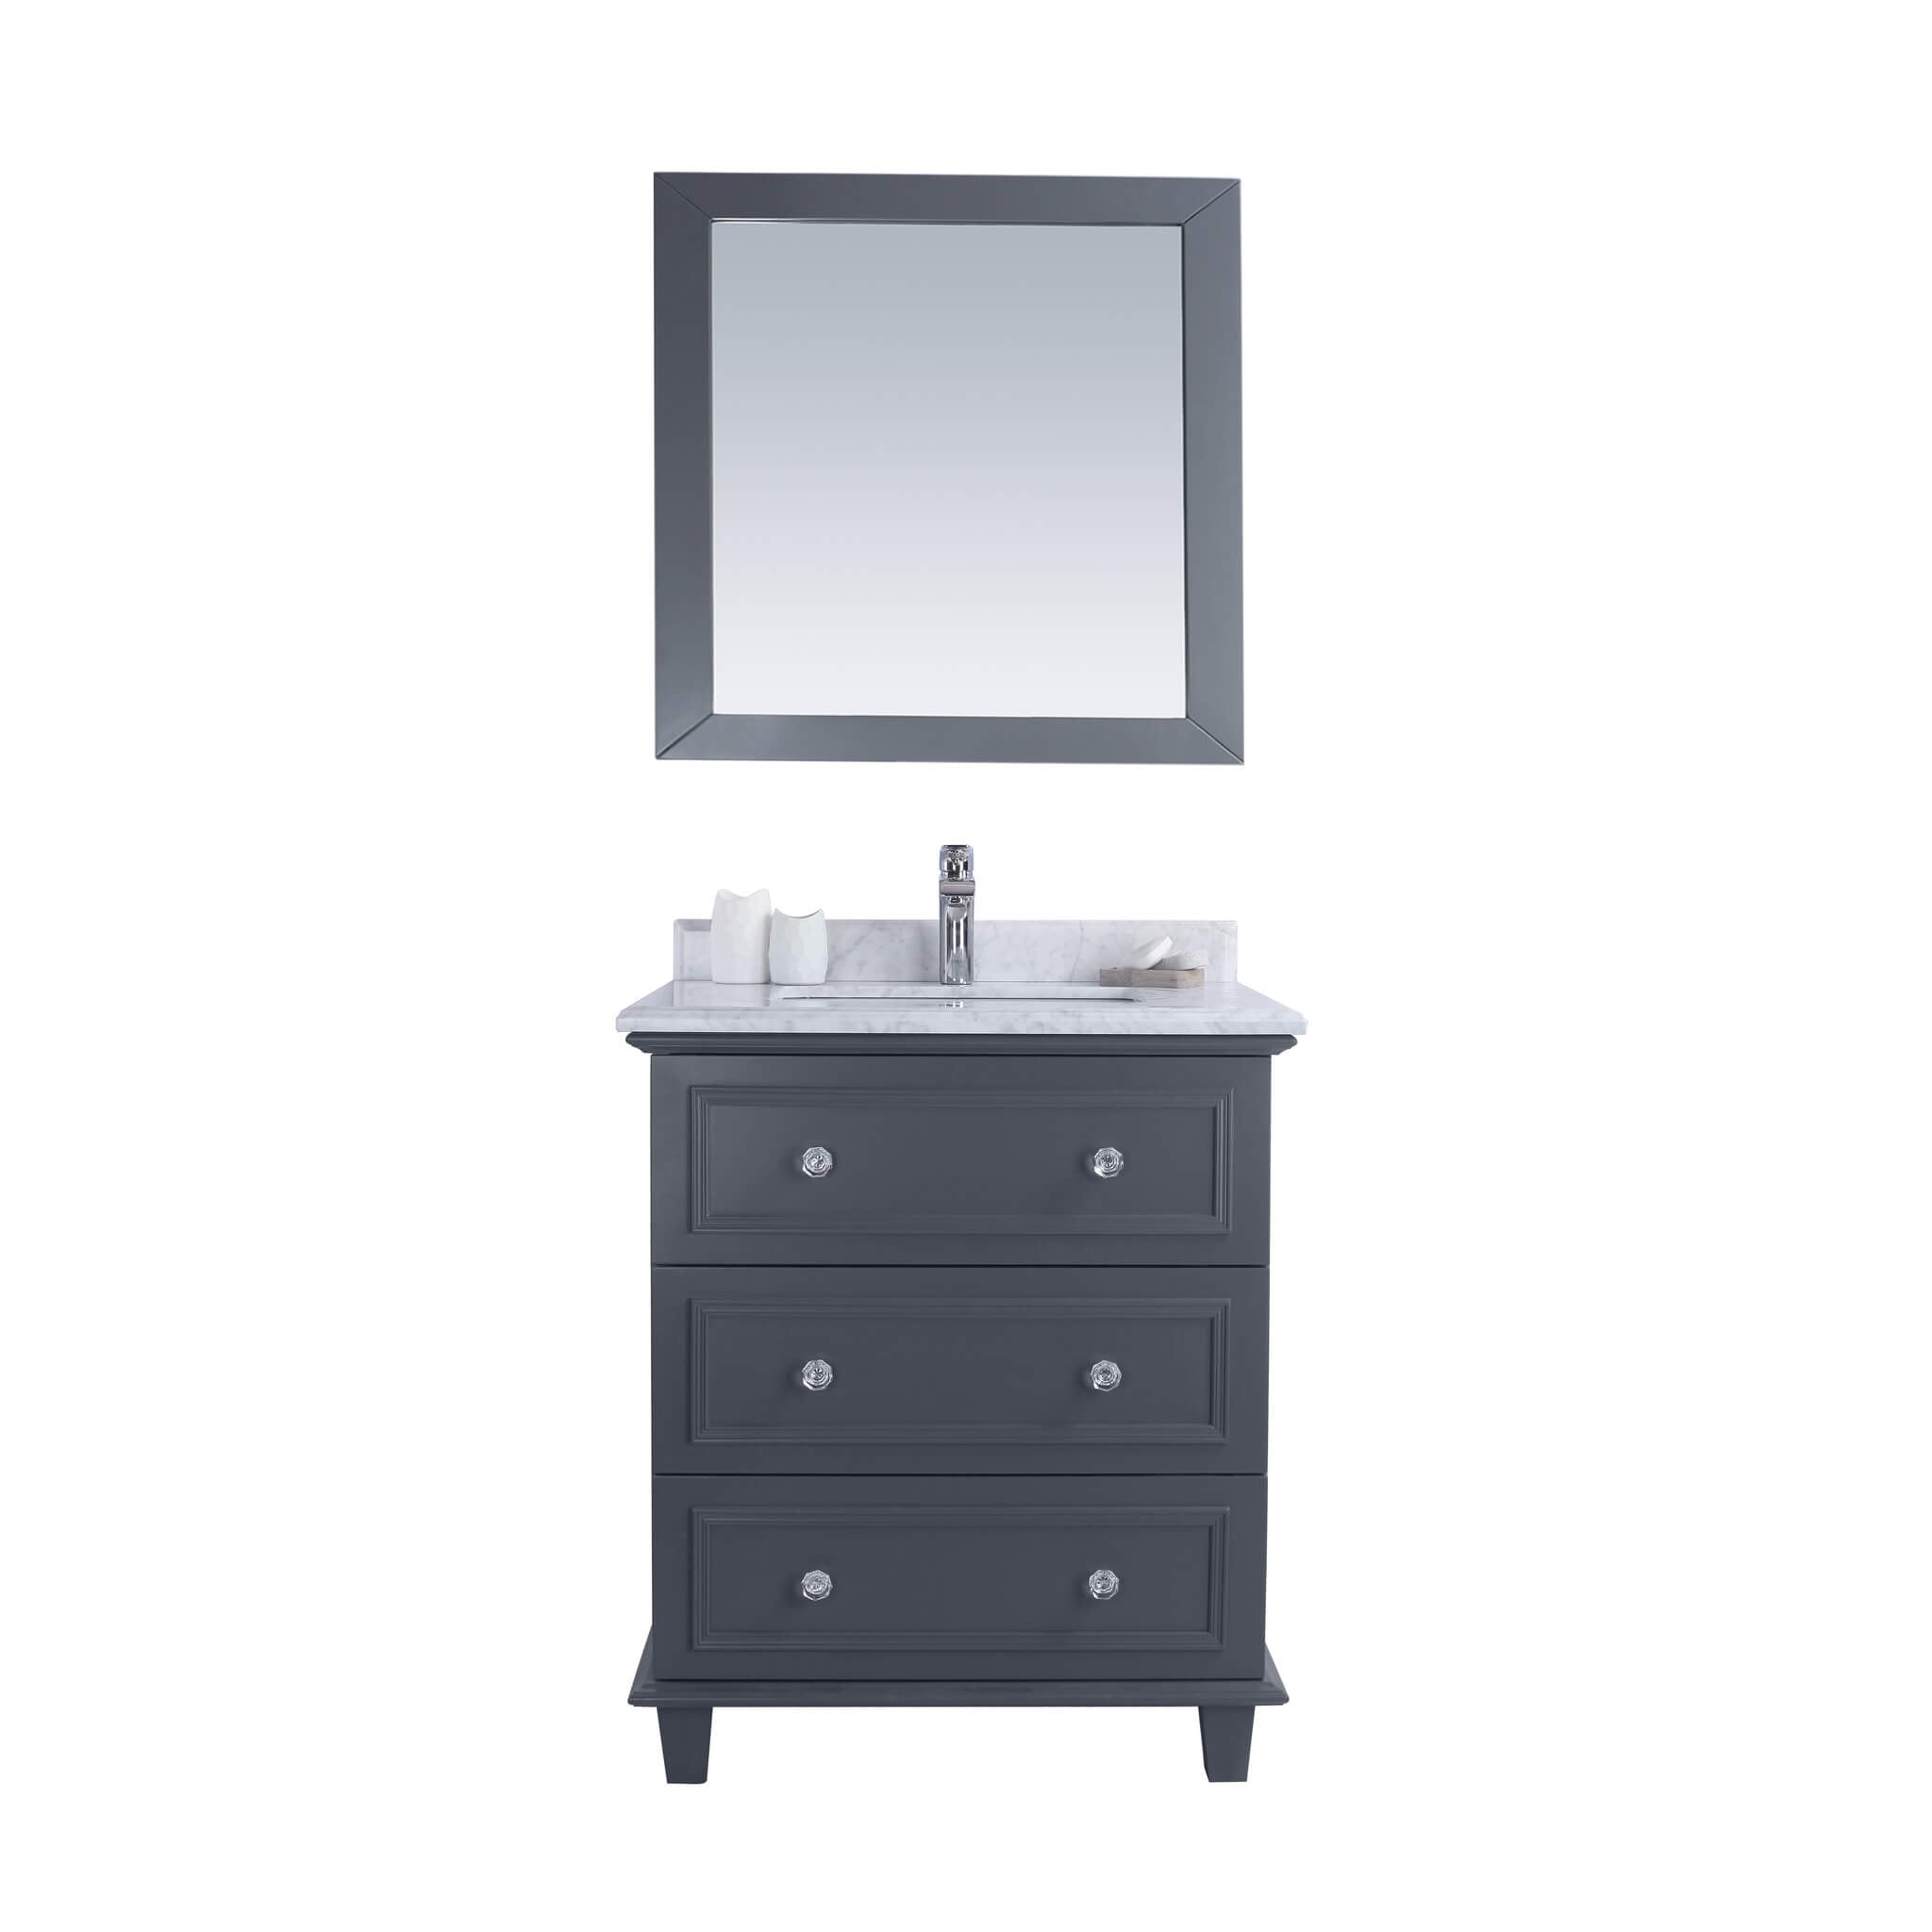 LAVIVA Luna 313DVN-30G-WC 30" Single Bathroom Vanity in Maple Gray with White Carrara Marble, White Rectangle Sink, Front View